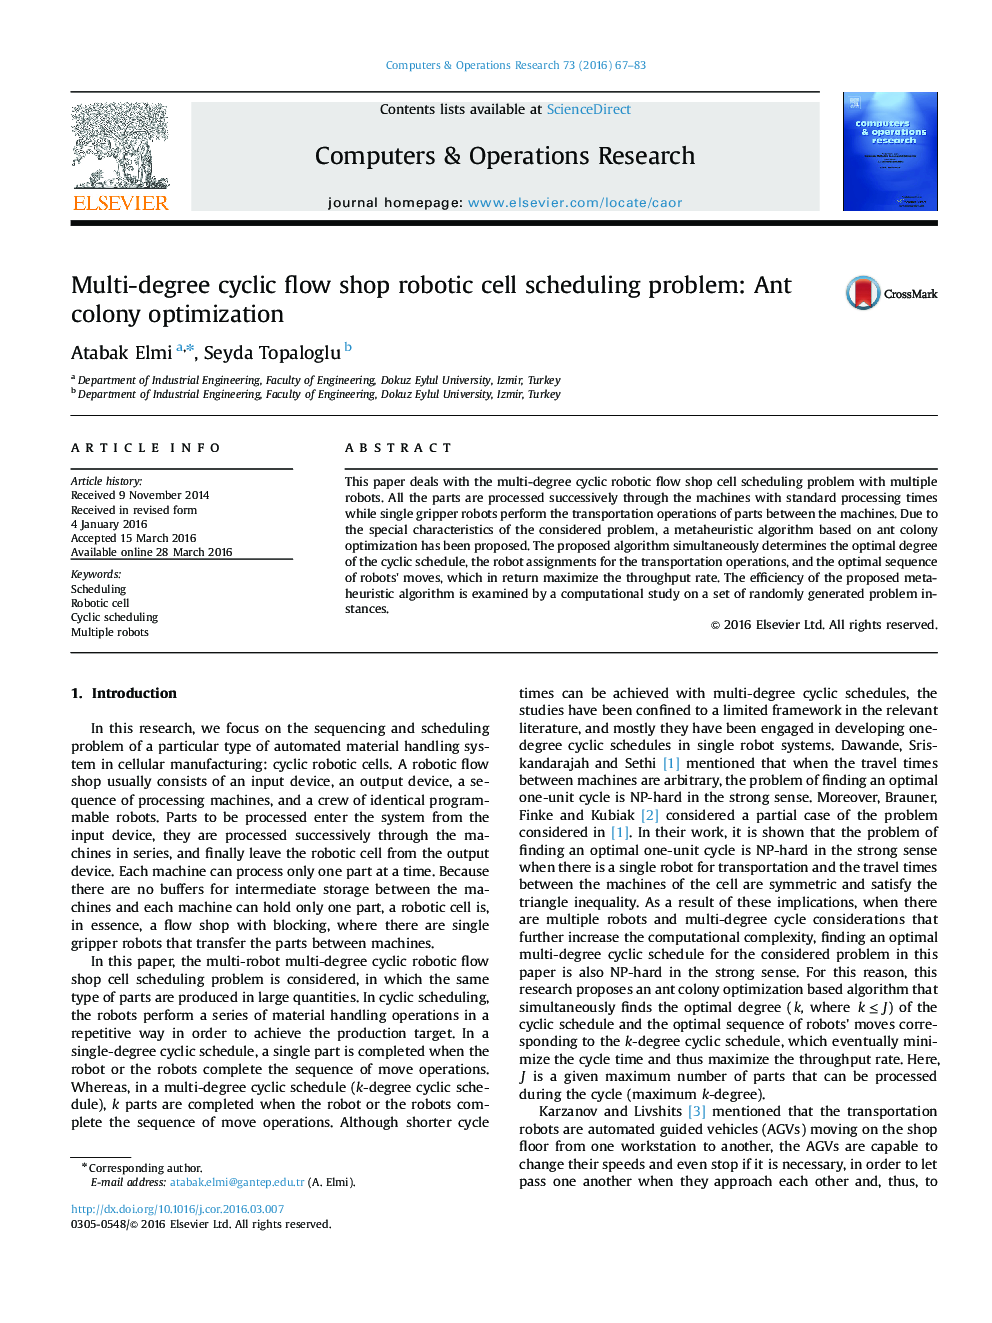 Multi-degree cyclic flow shop robotic cell scheduling problem: Ant colony optimization